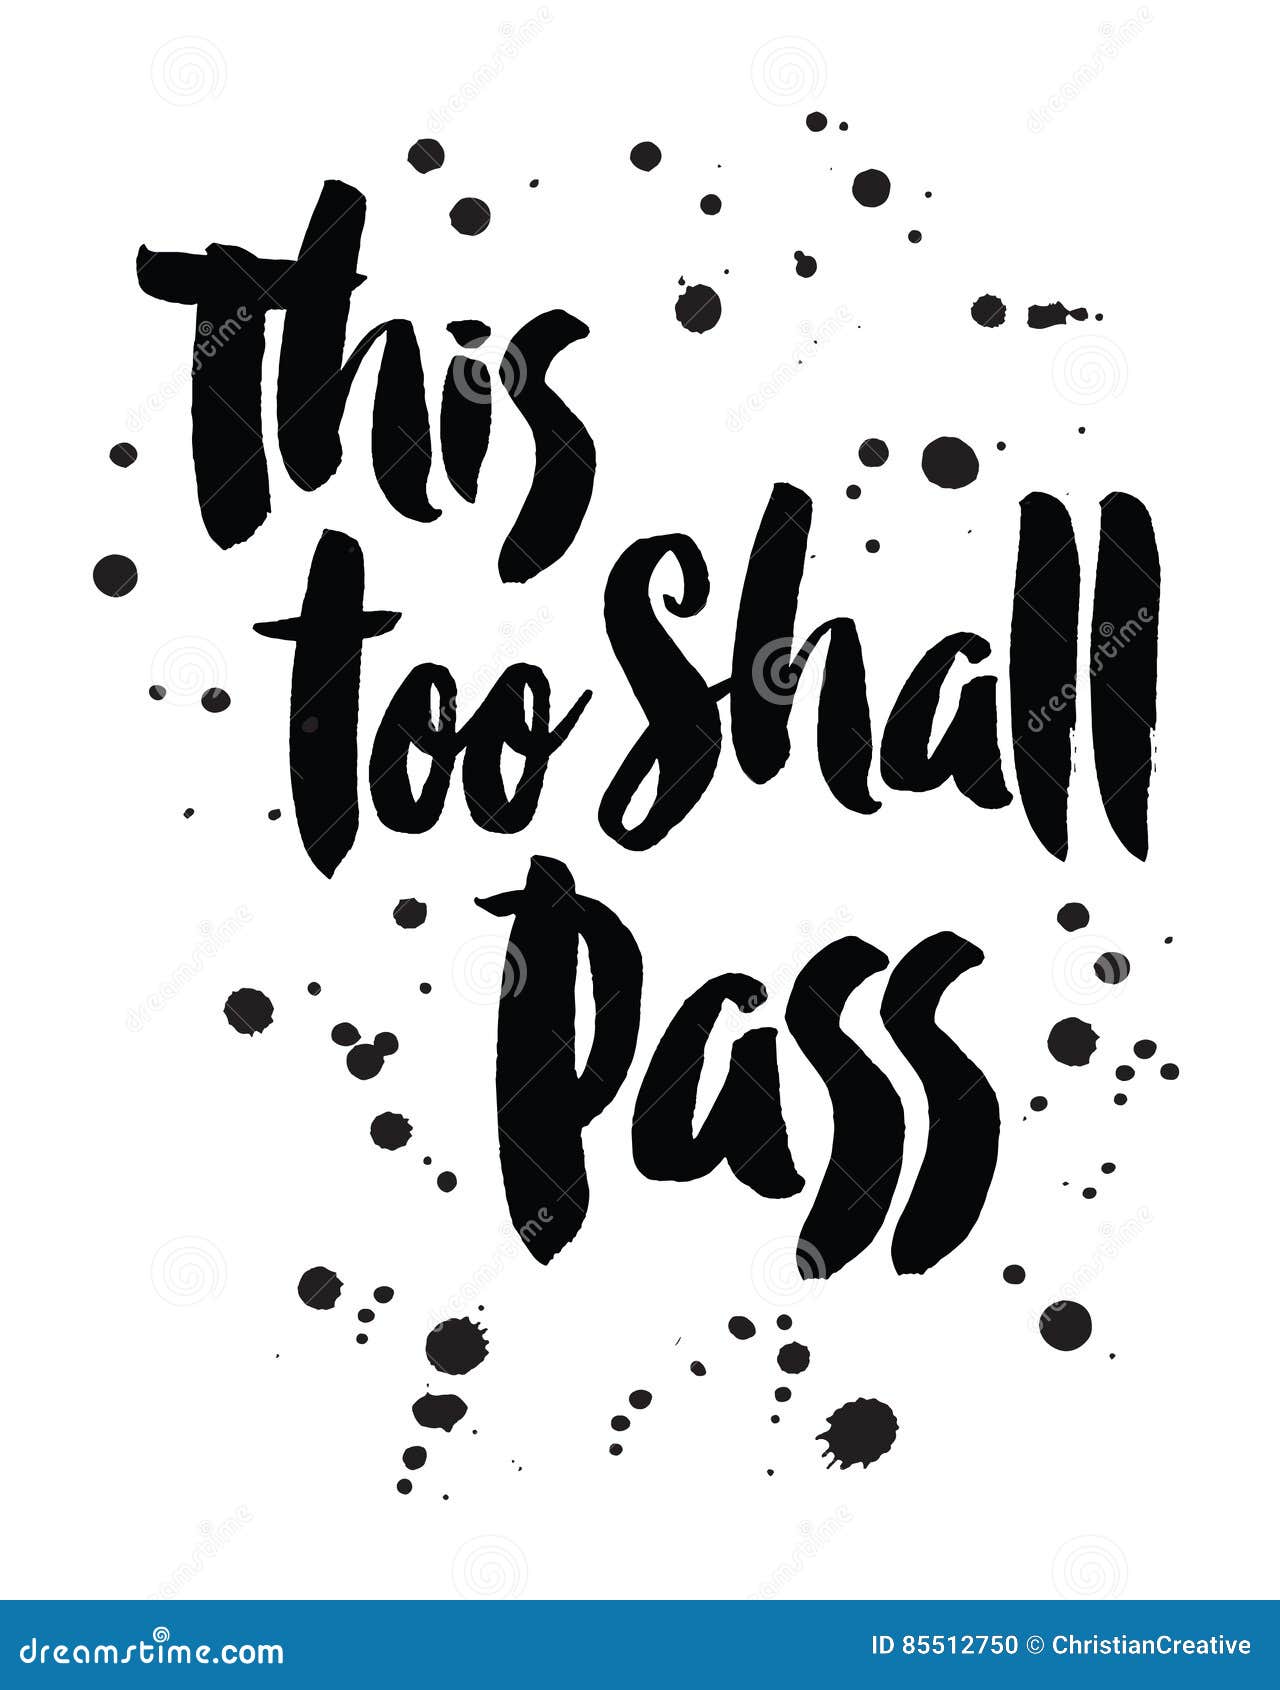 this too shall pass